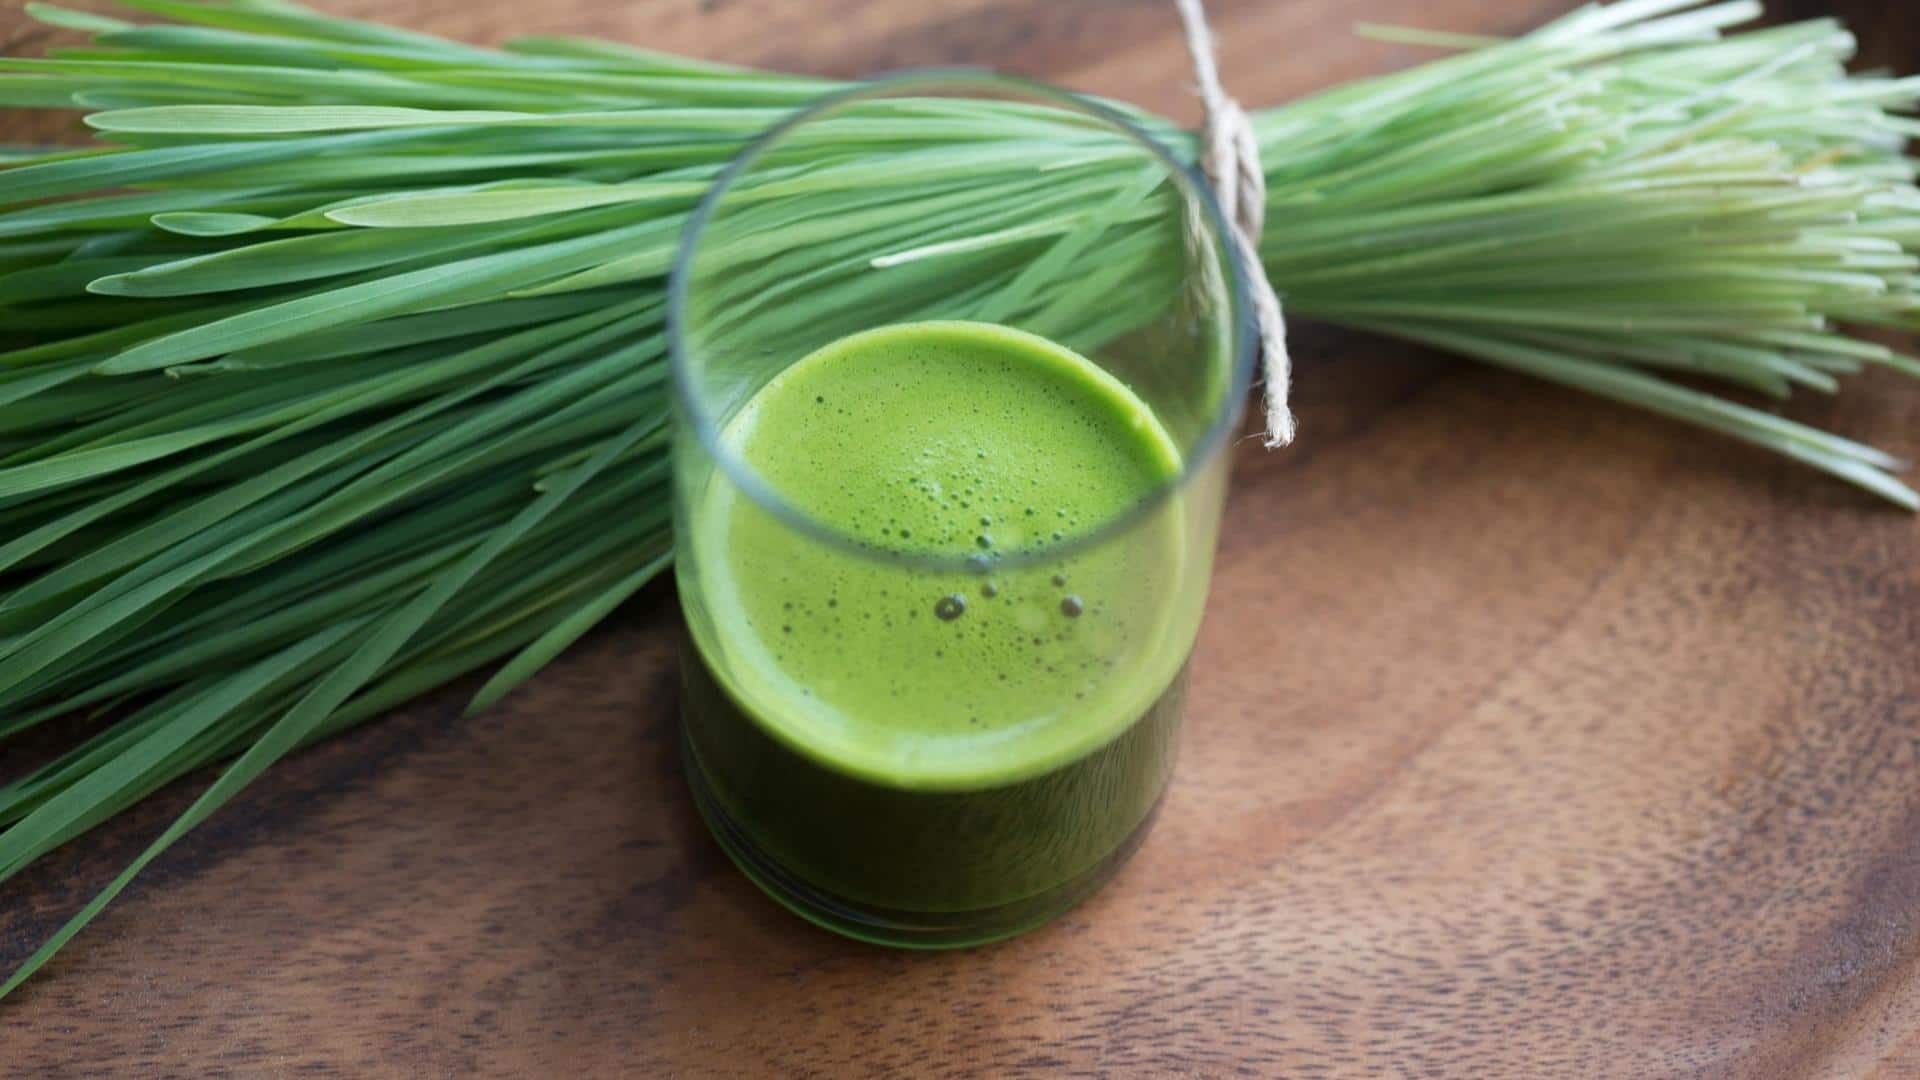 Take note of these five health benefits of wheatgrass